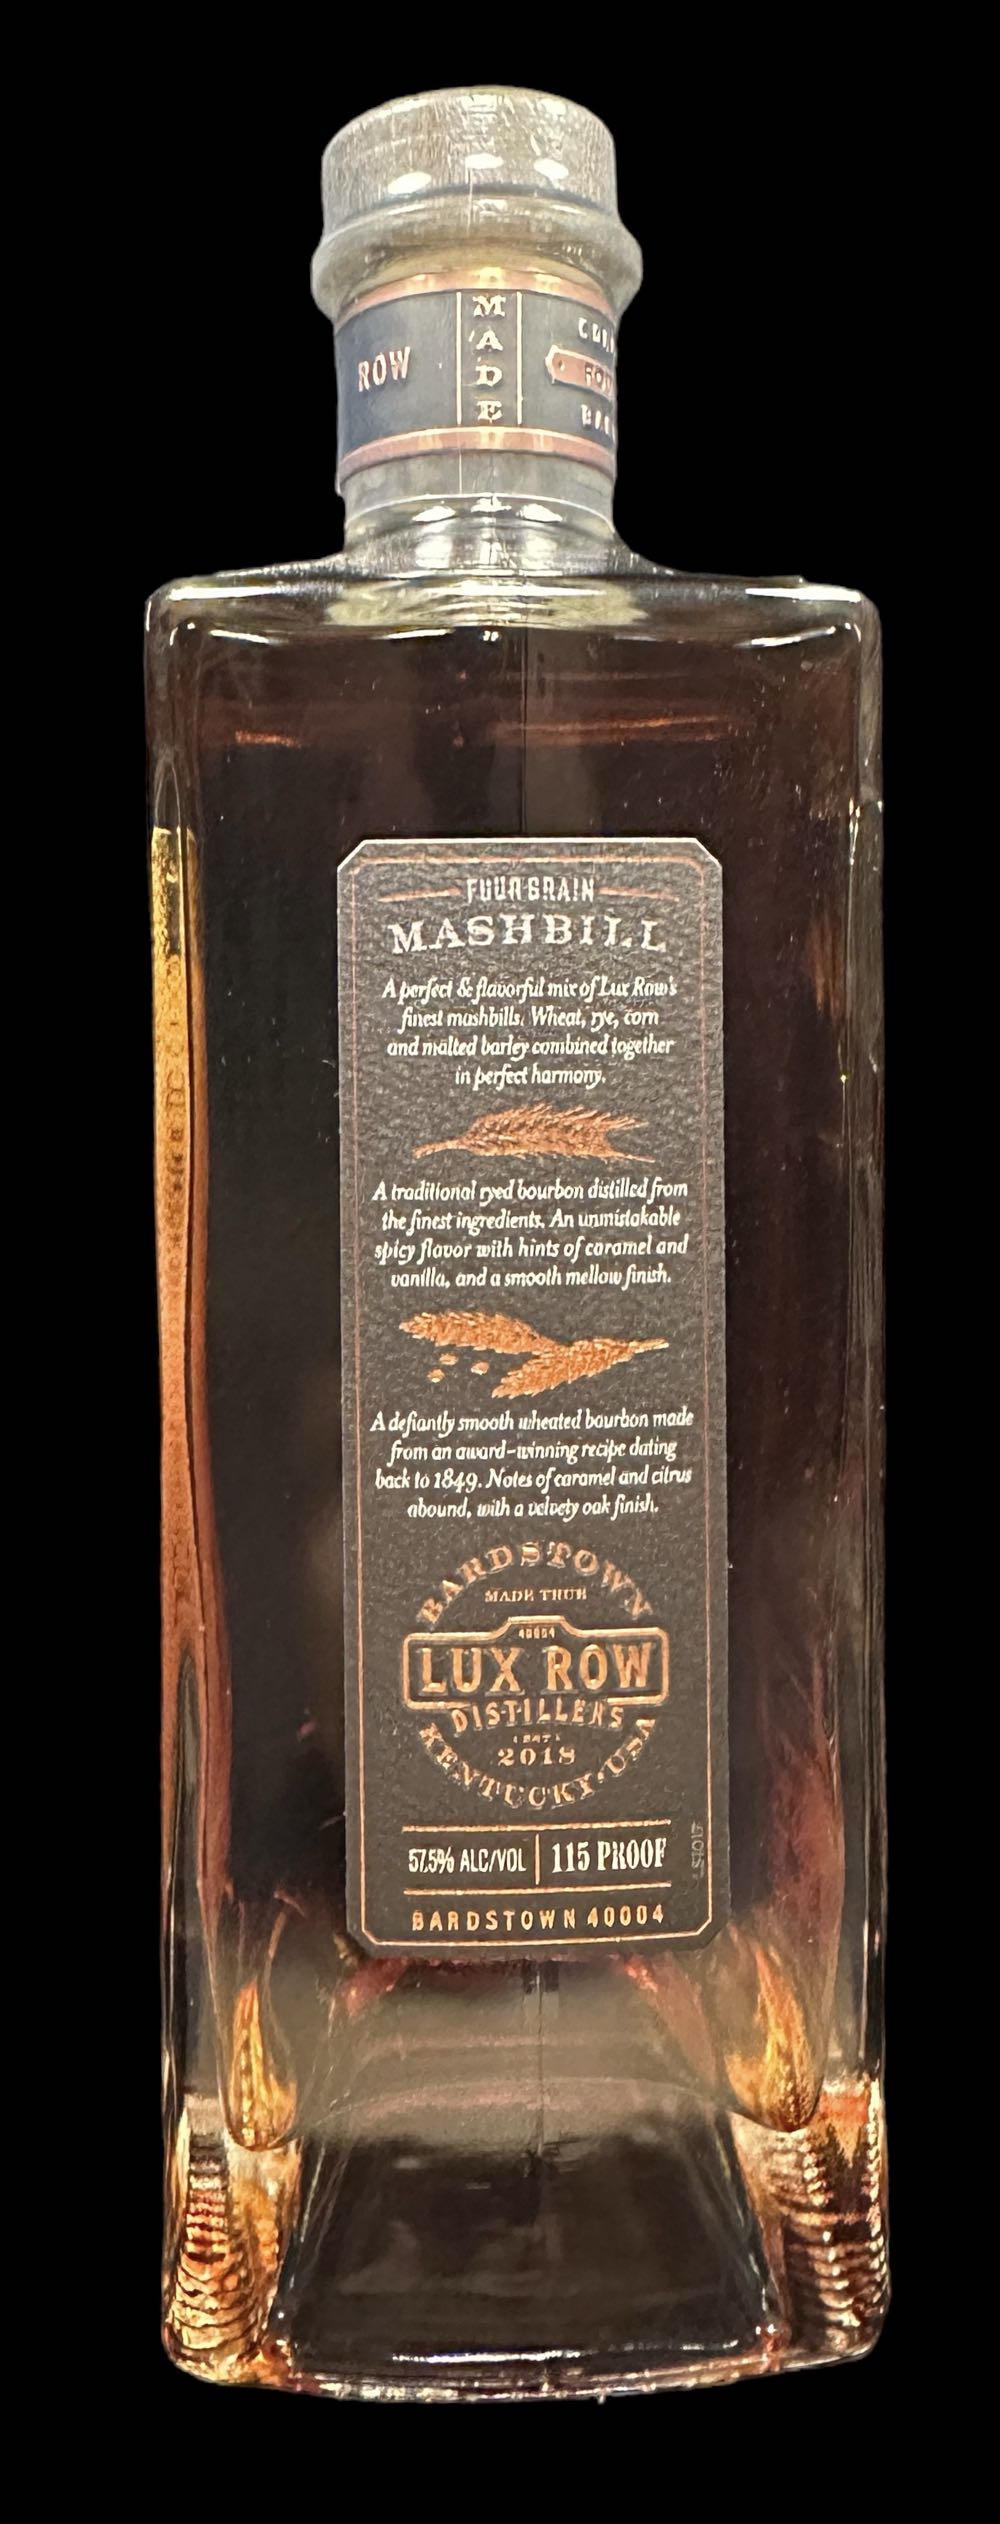 Lux Row Four Grain Double Single Barrel - Lux Row Distillers (750 mL) alcohol collectible [Barcode 088352140346] - Main Image 3